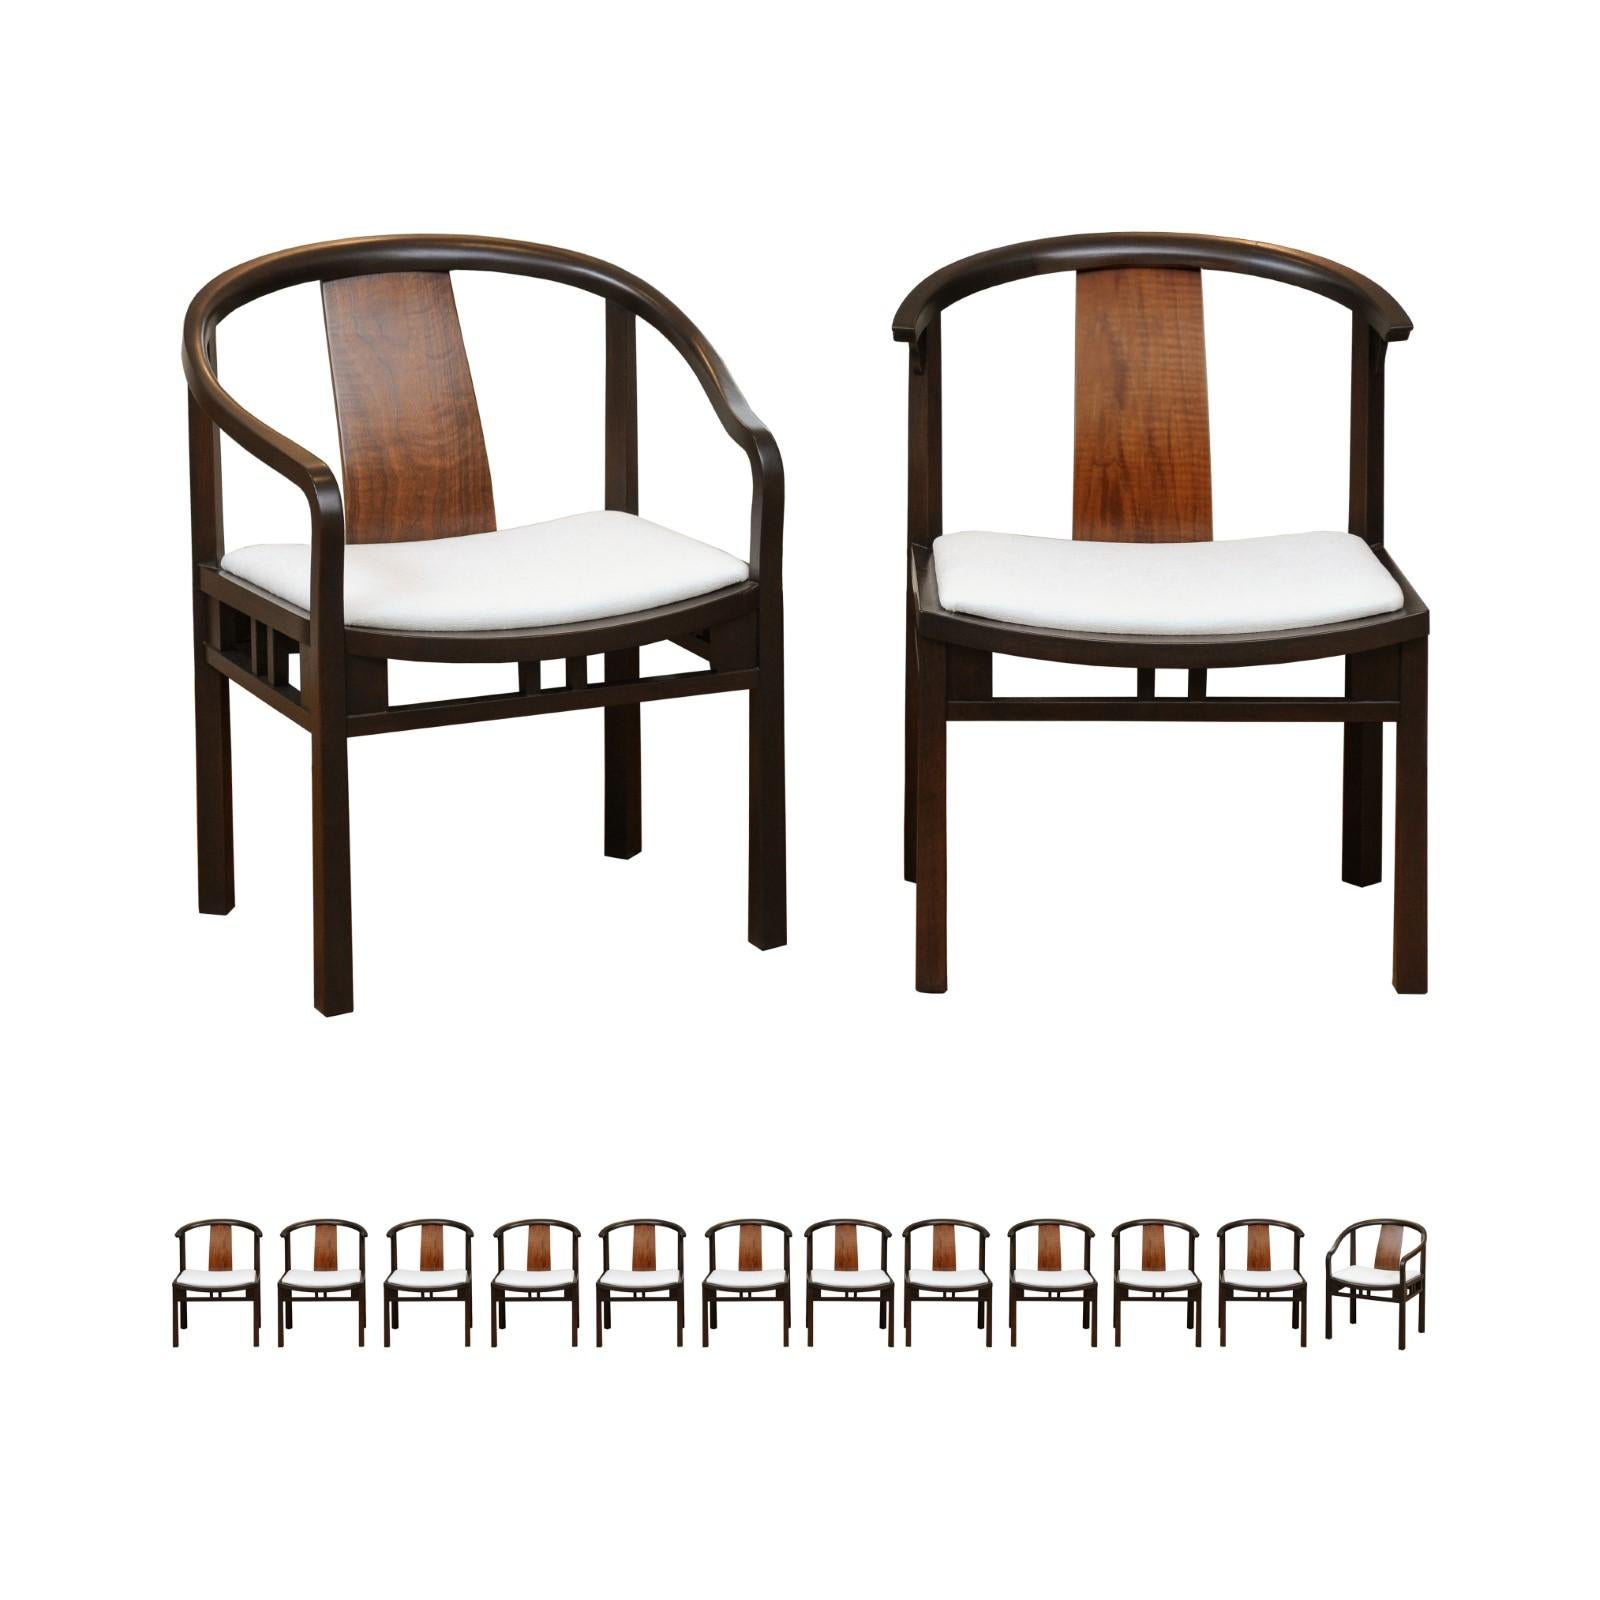 Incredible Set of 14 Rare Walnut Dining Chairs by Michael Taylor, circa 1955 For Sale 11